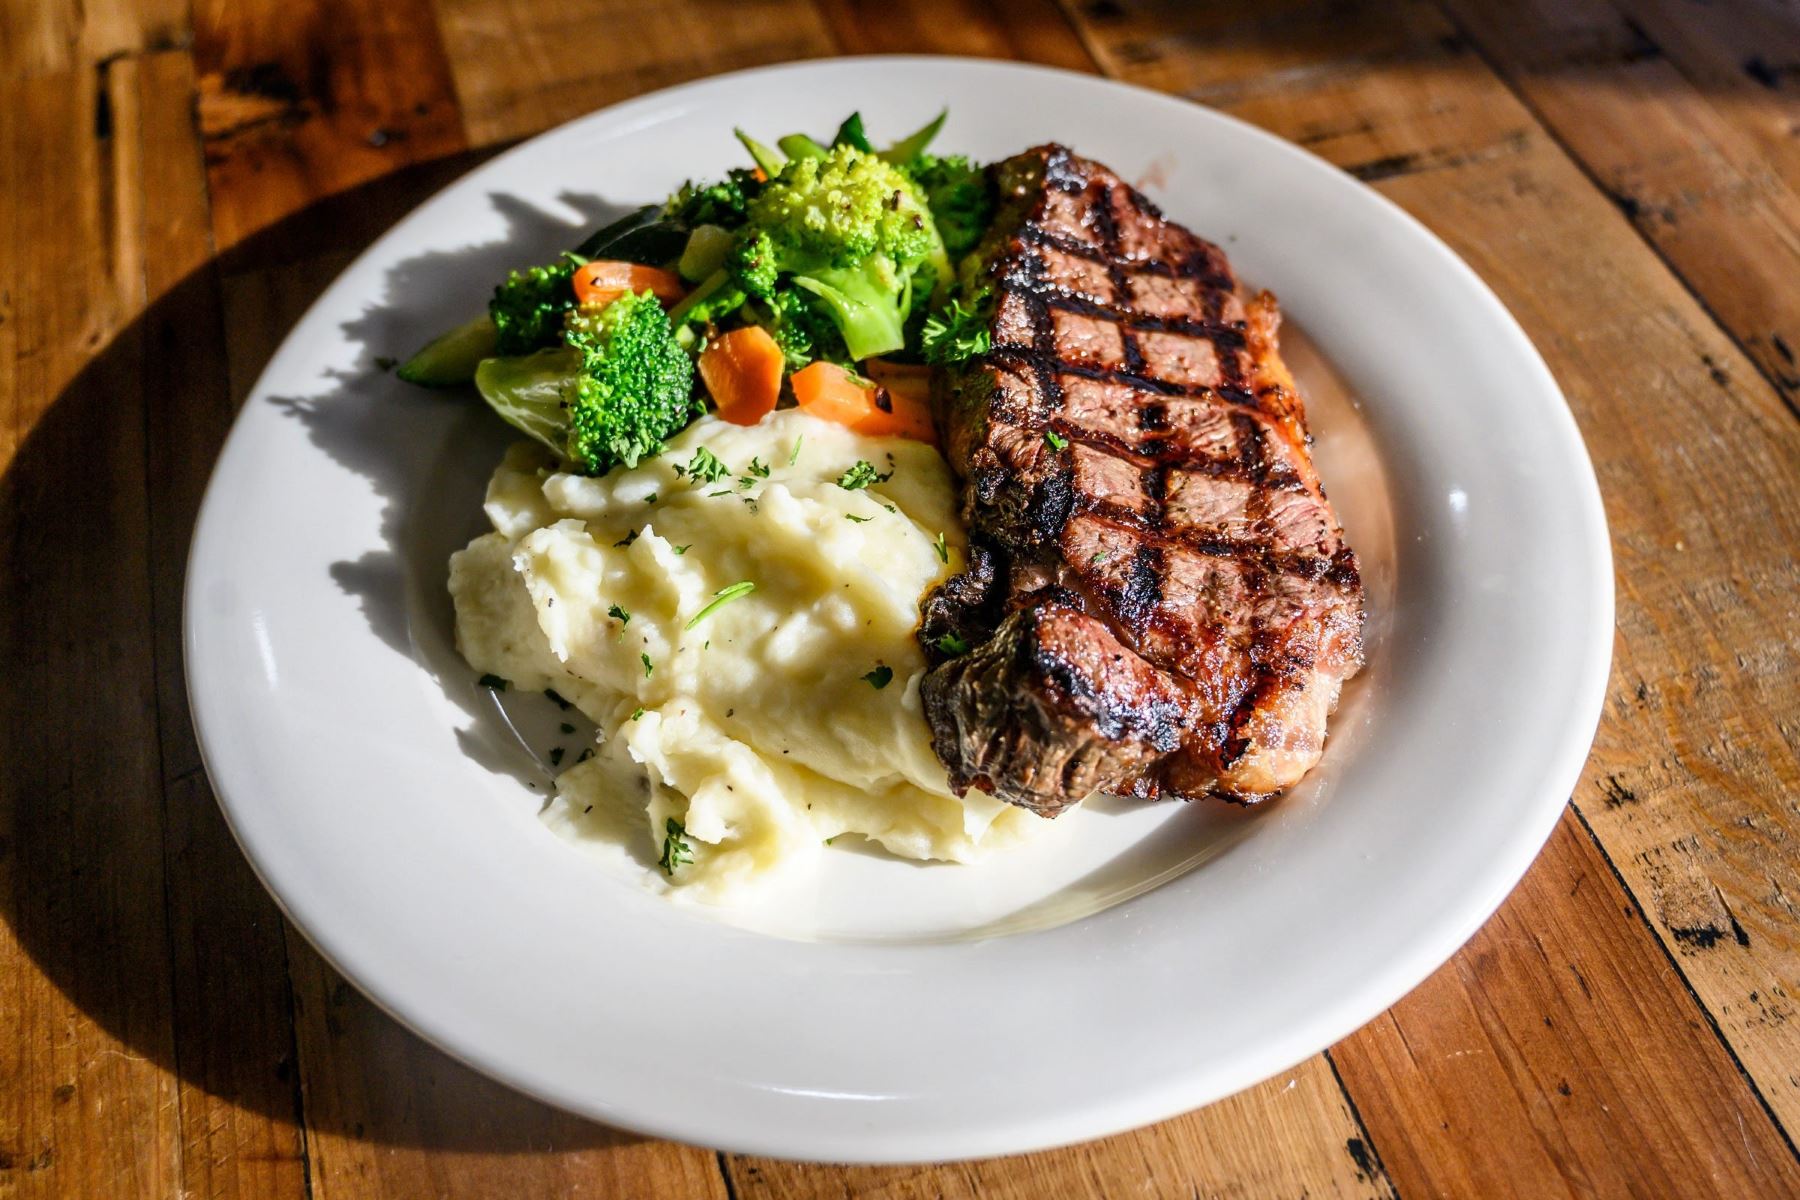 The Ultimate Steakhouse Showdown: Ruth's Chris Vs. Longhorn Vs. Outback - Which Reigns Supreme?